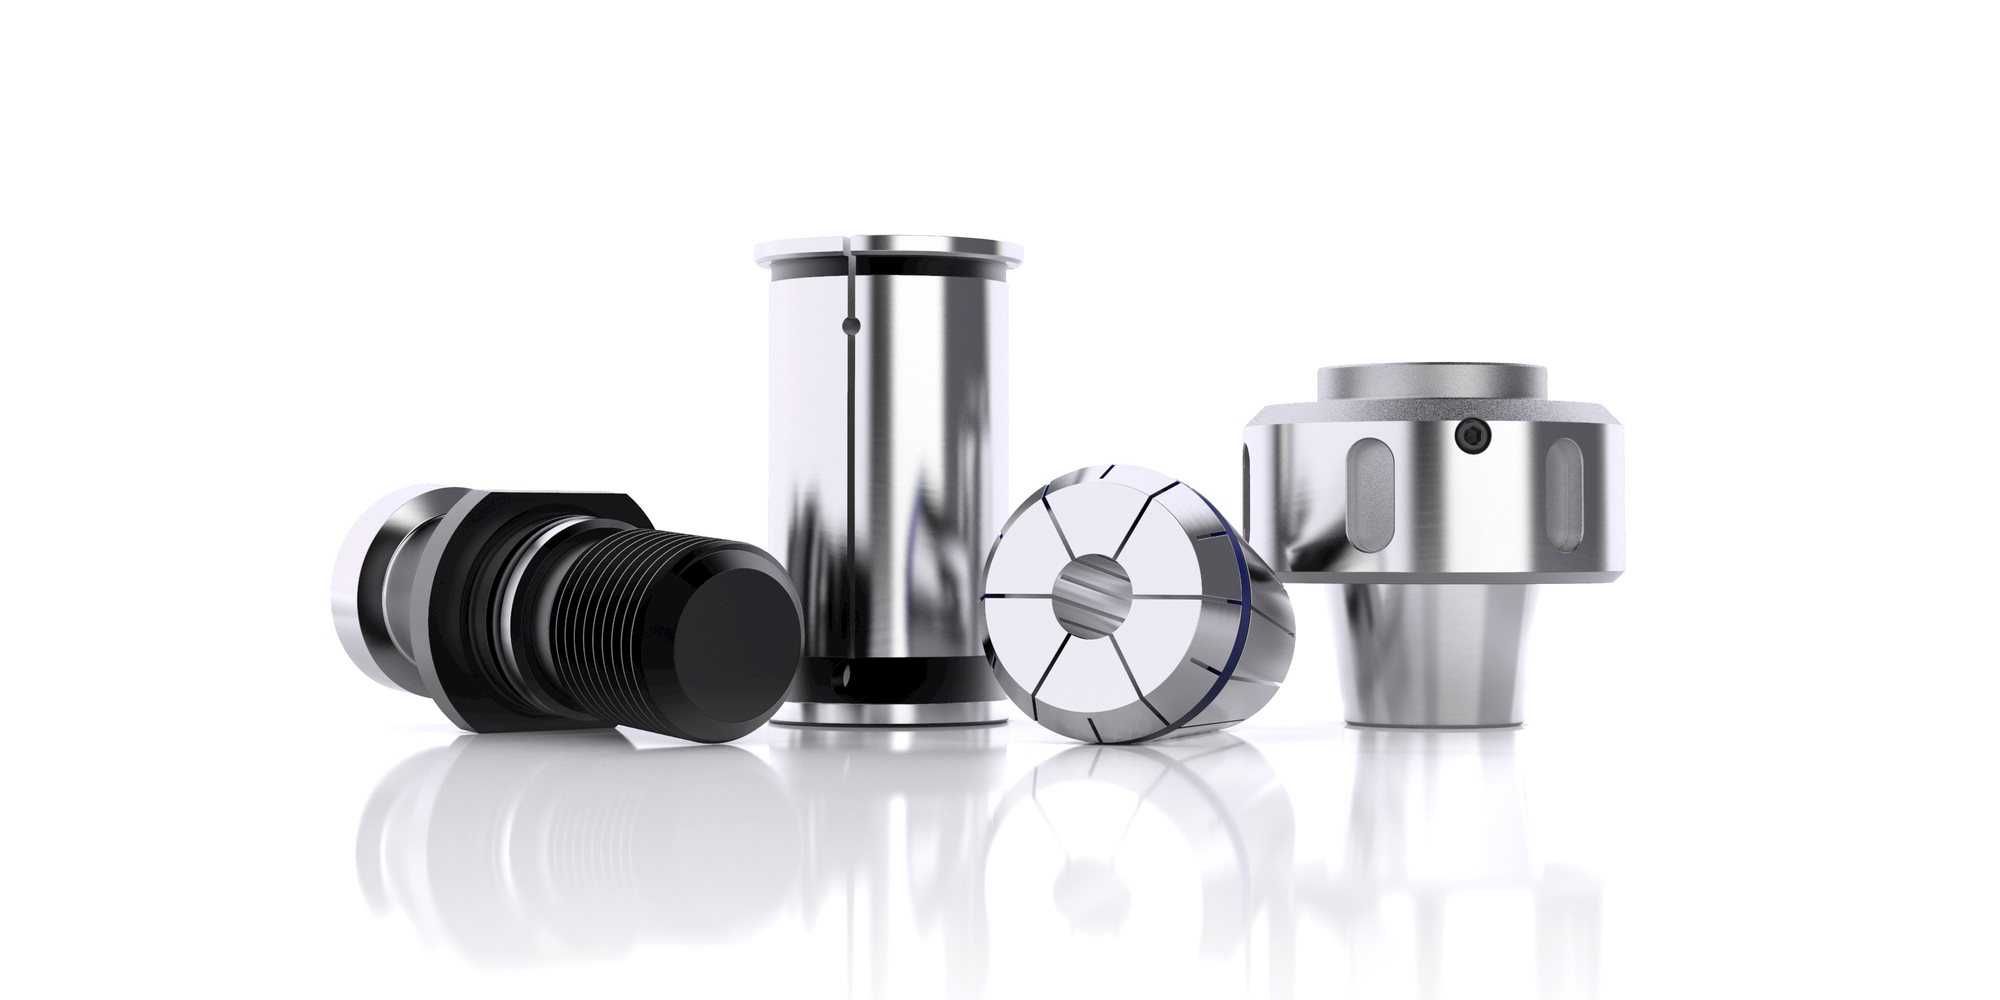 Tooling Systems Accessories Group Image.tif